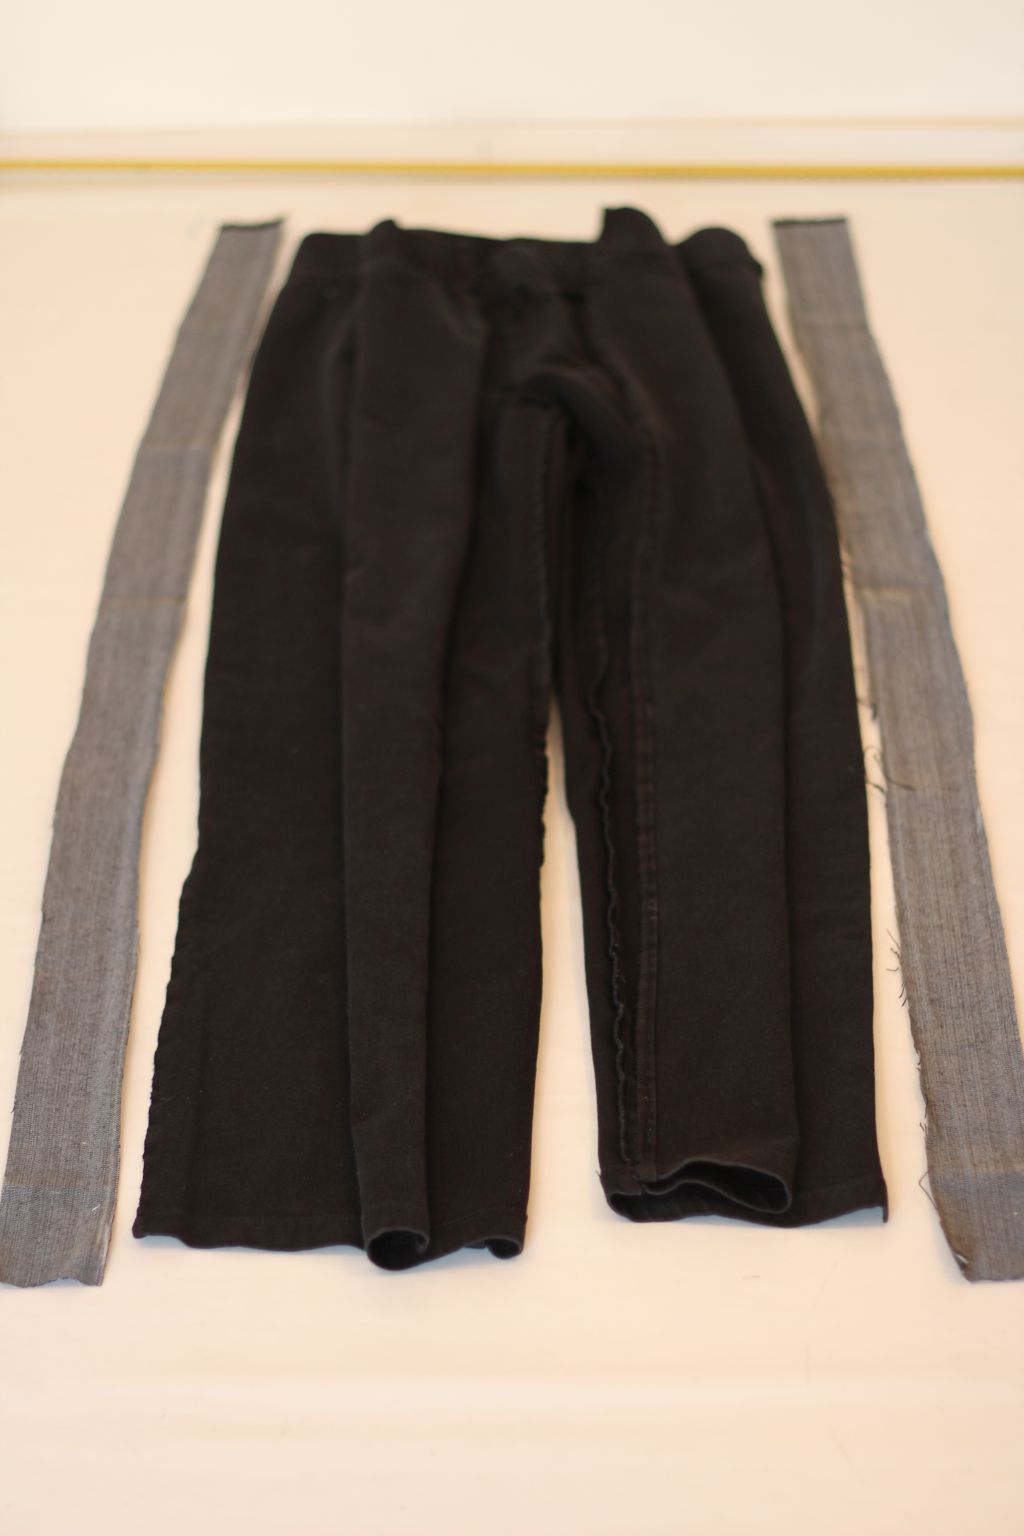 Lay side strips next to pants